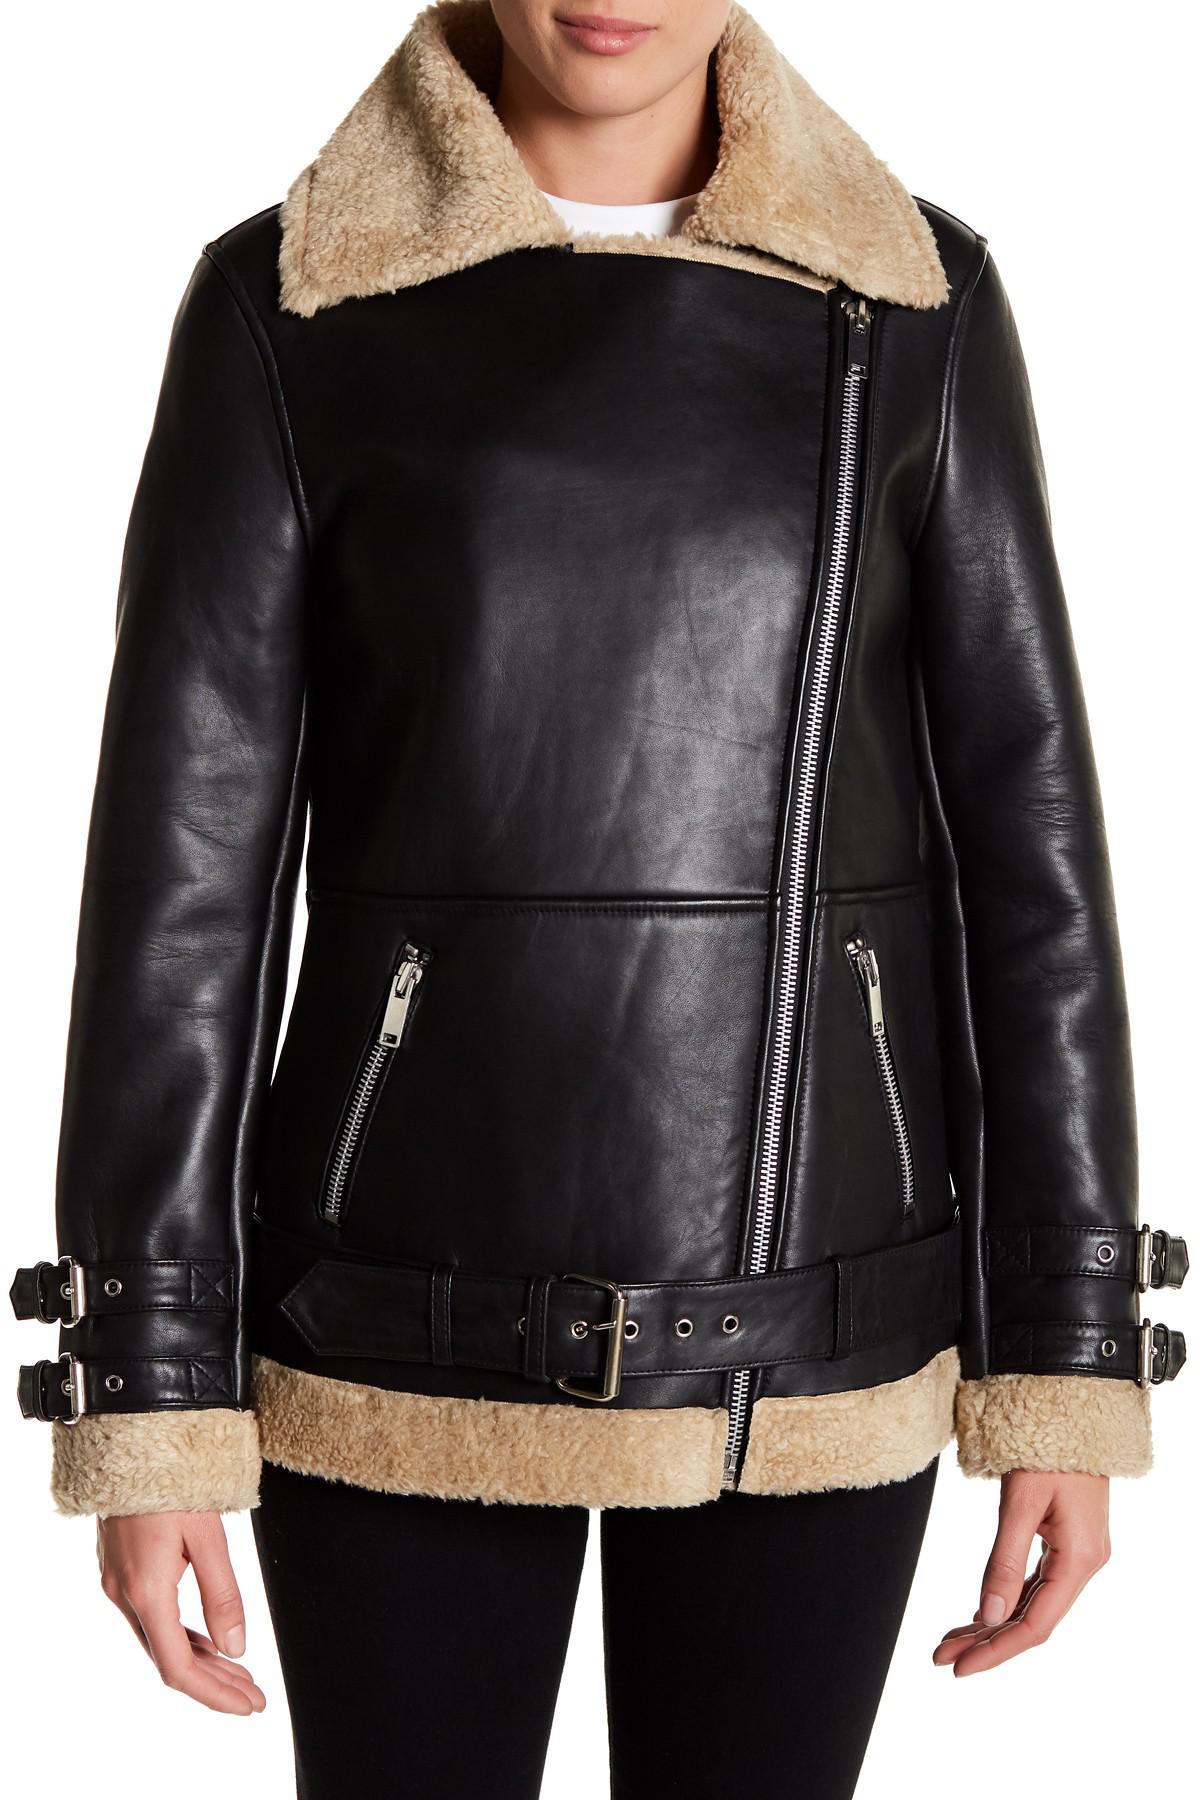 Lyst - W118 by Walter Baker Bria Genuine Lamb Leather Jacket in Black